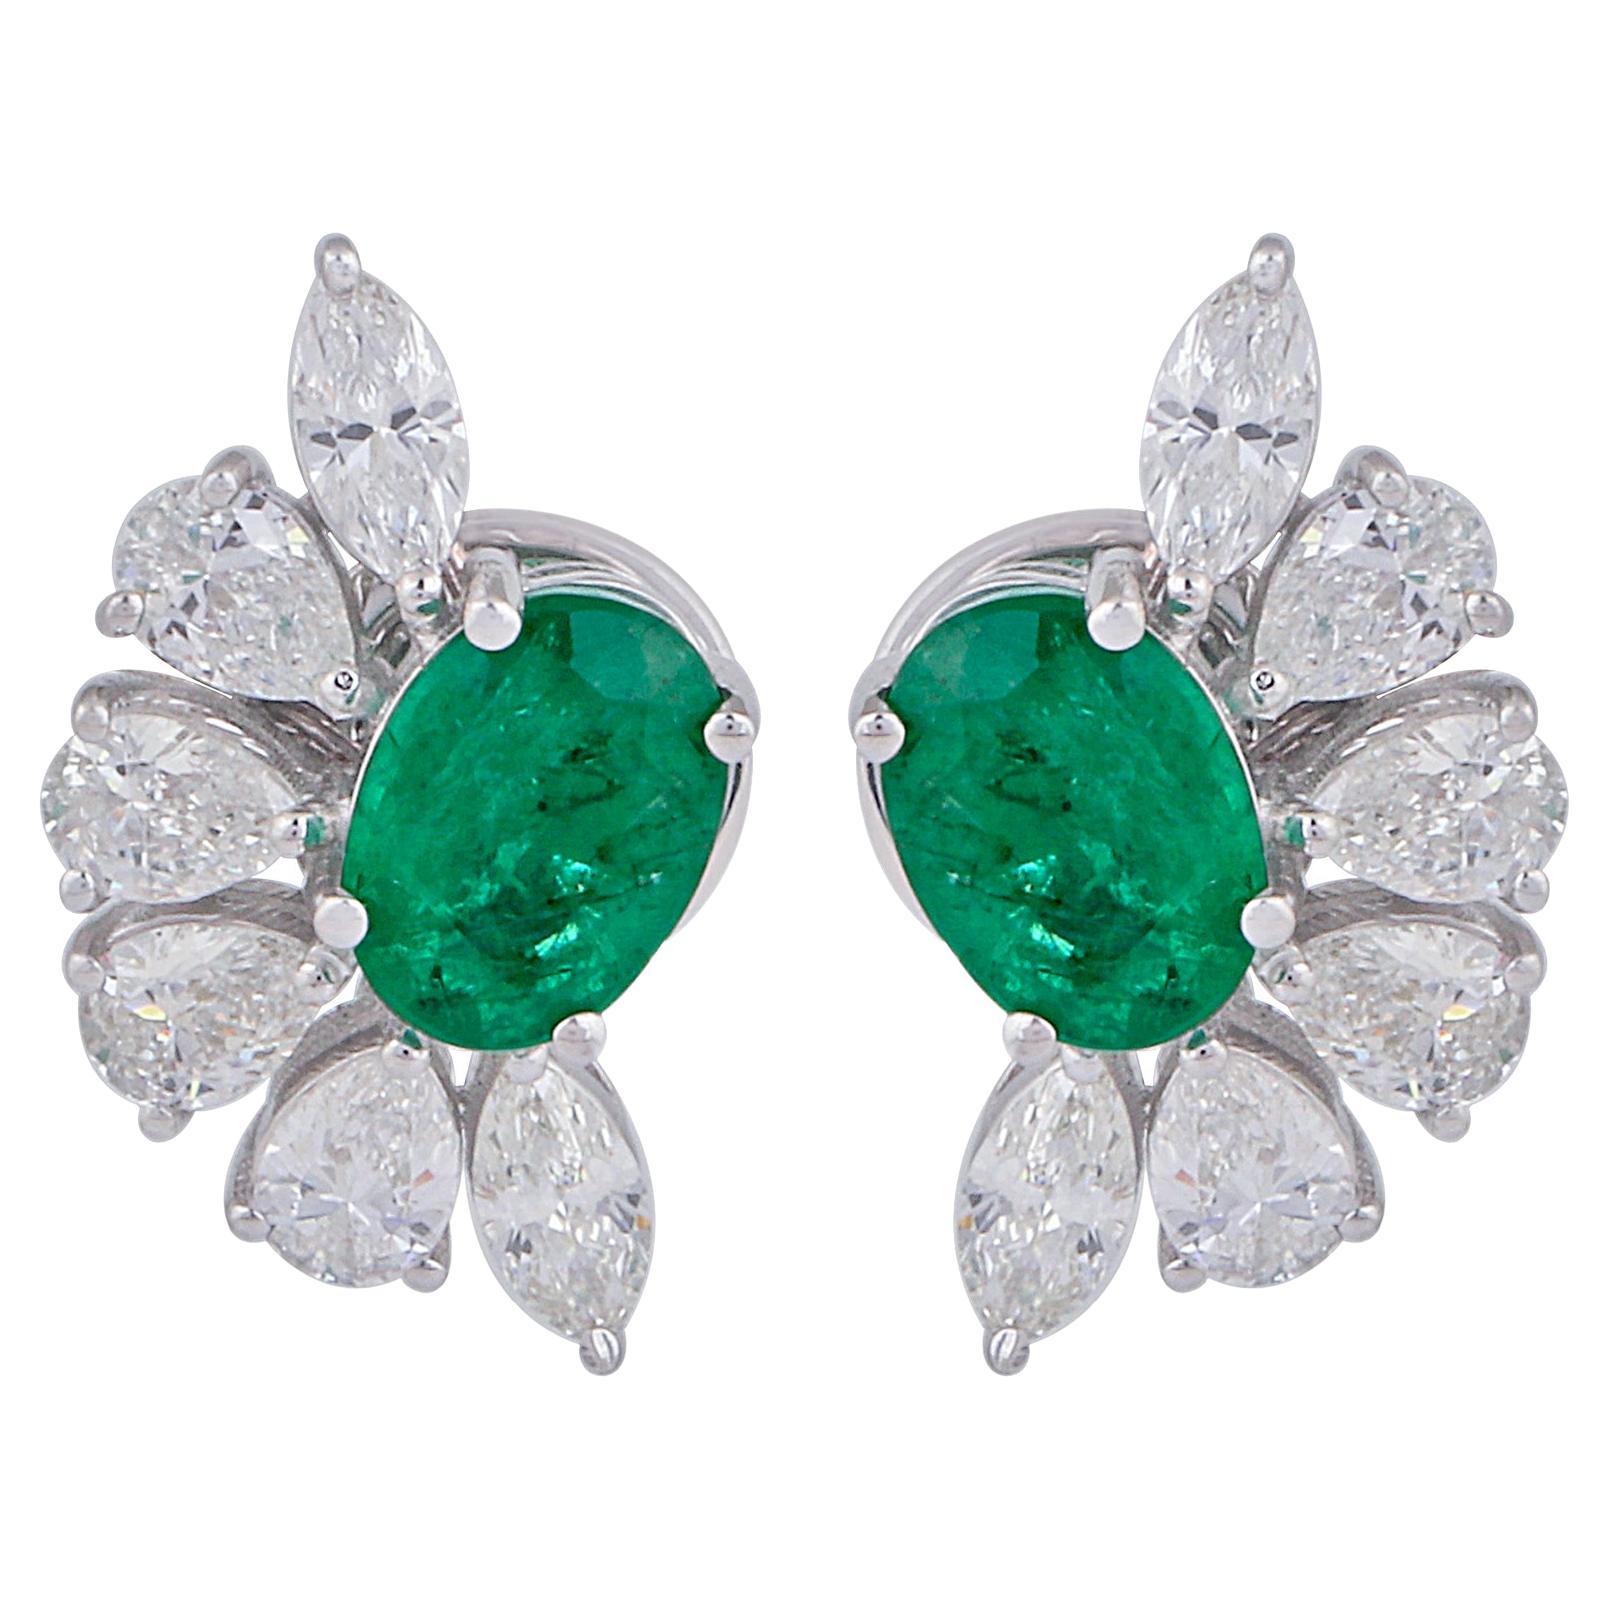 Oval Natural Emerald Gemstone Stud Earrings Diamond 14k White Gold Fine Jewelry For Sale